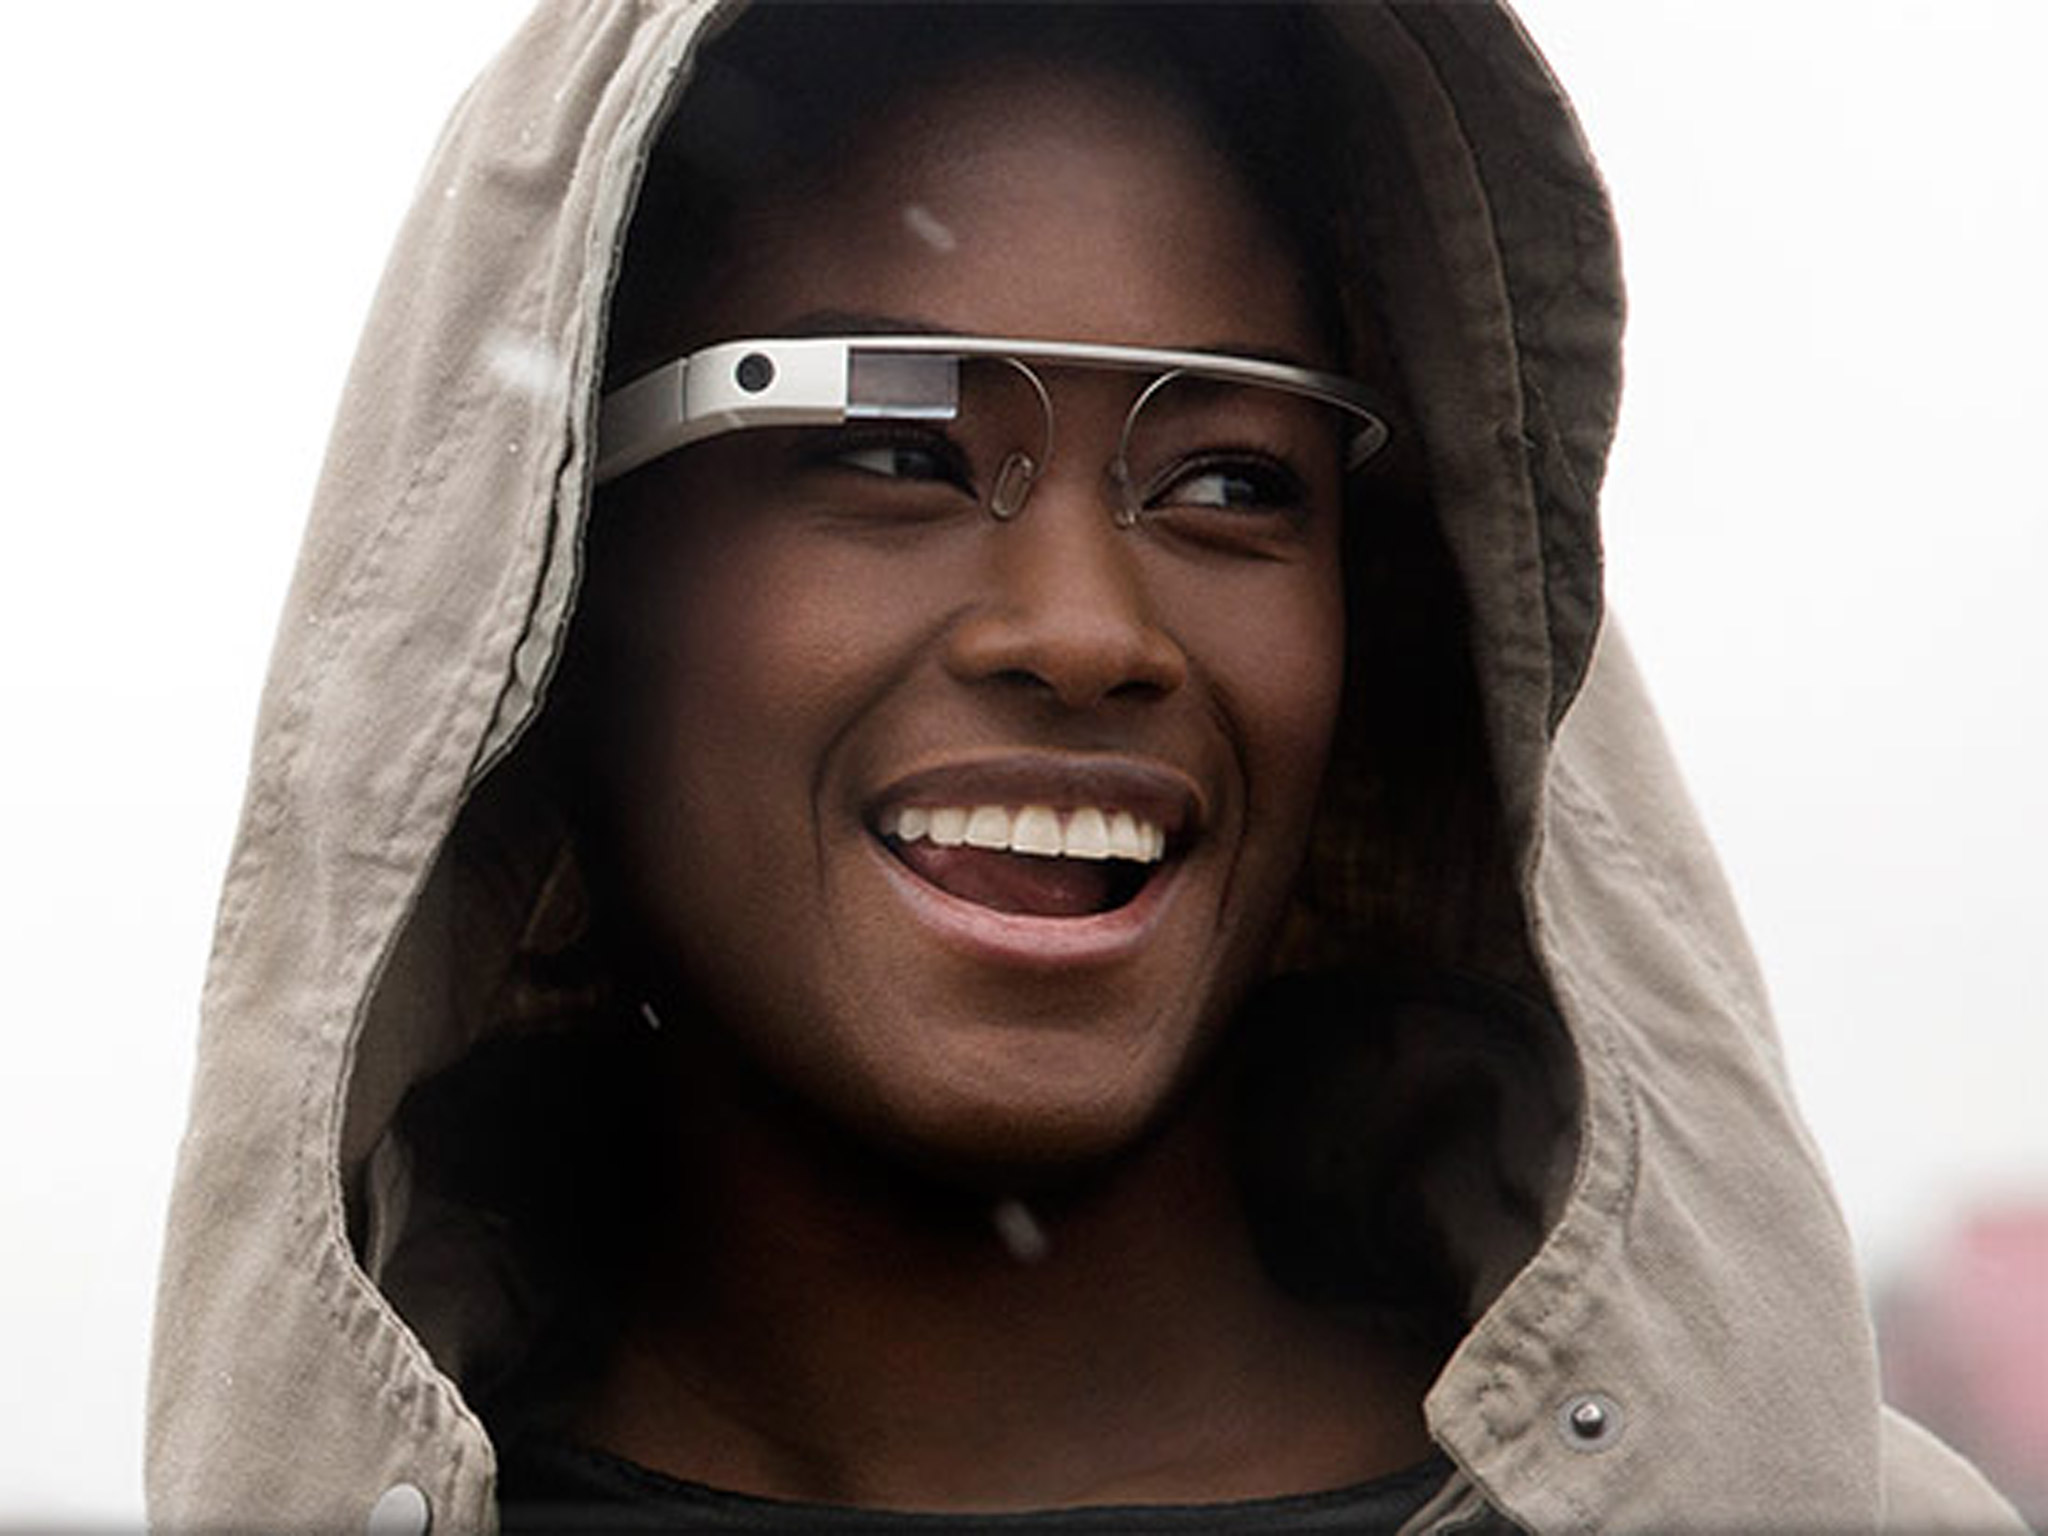 Google has officially killed off Google Glass